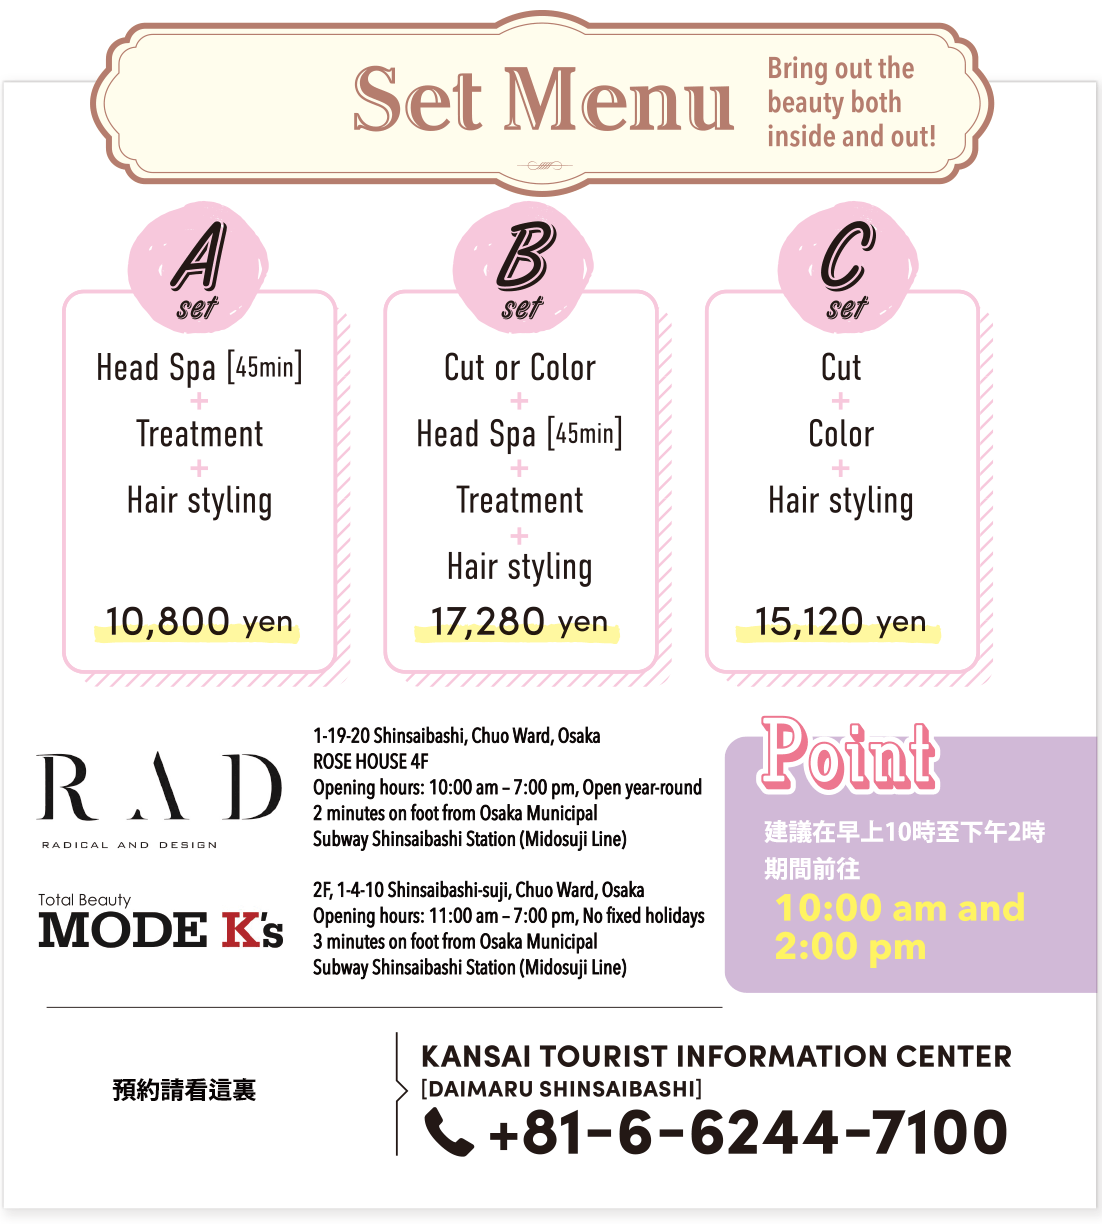 Set Menu Bring out the beauty both inside and out! / TEL：+81-6-6244-7100